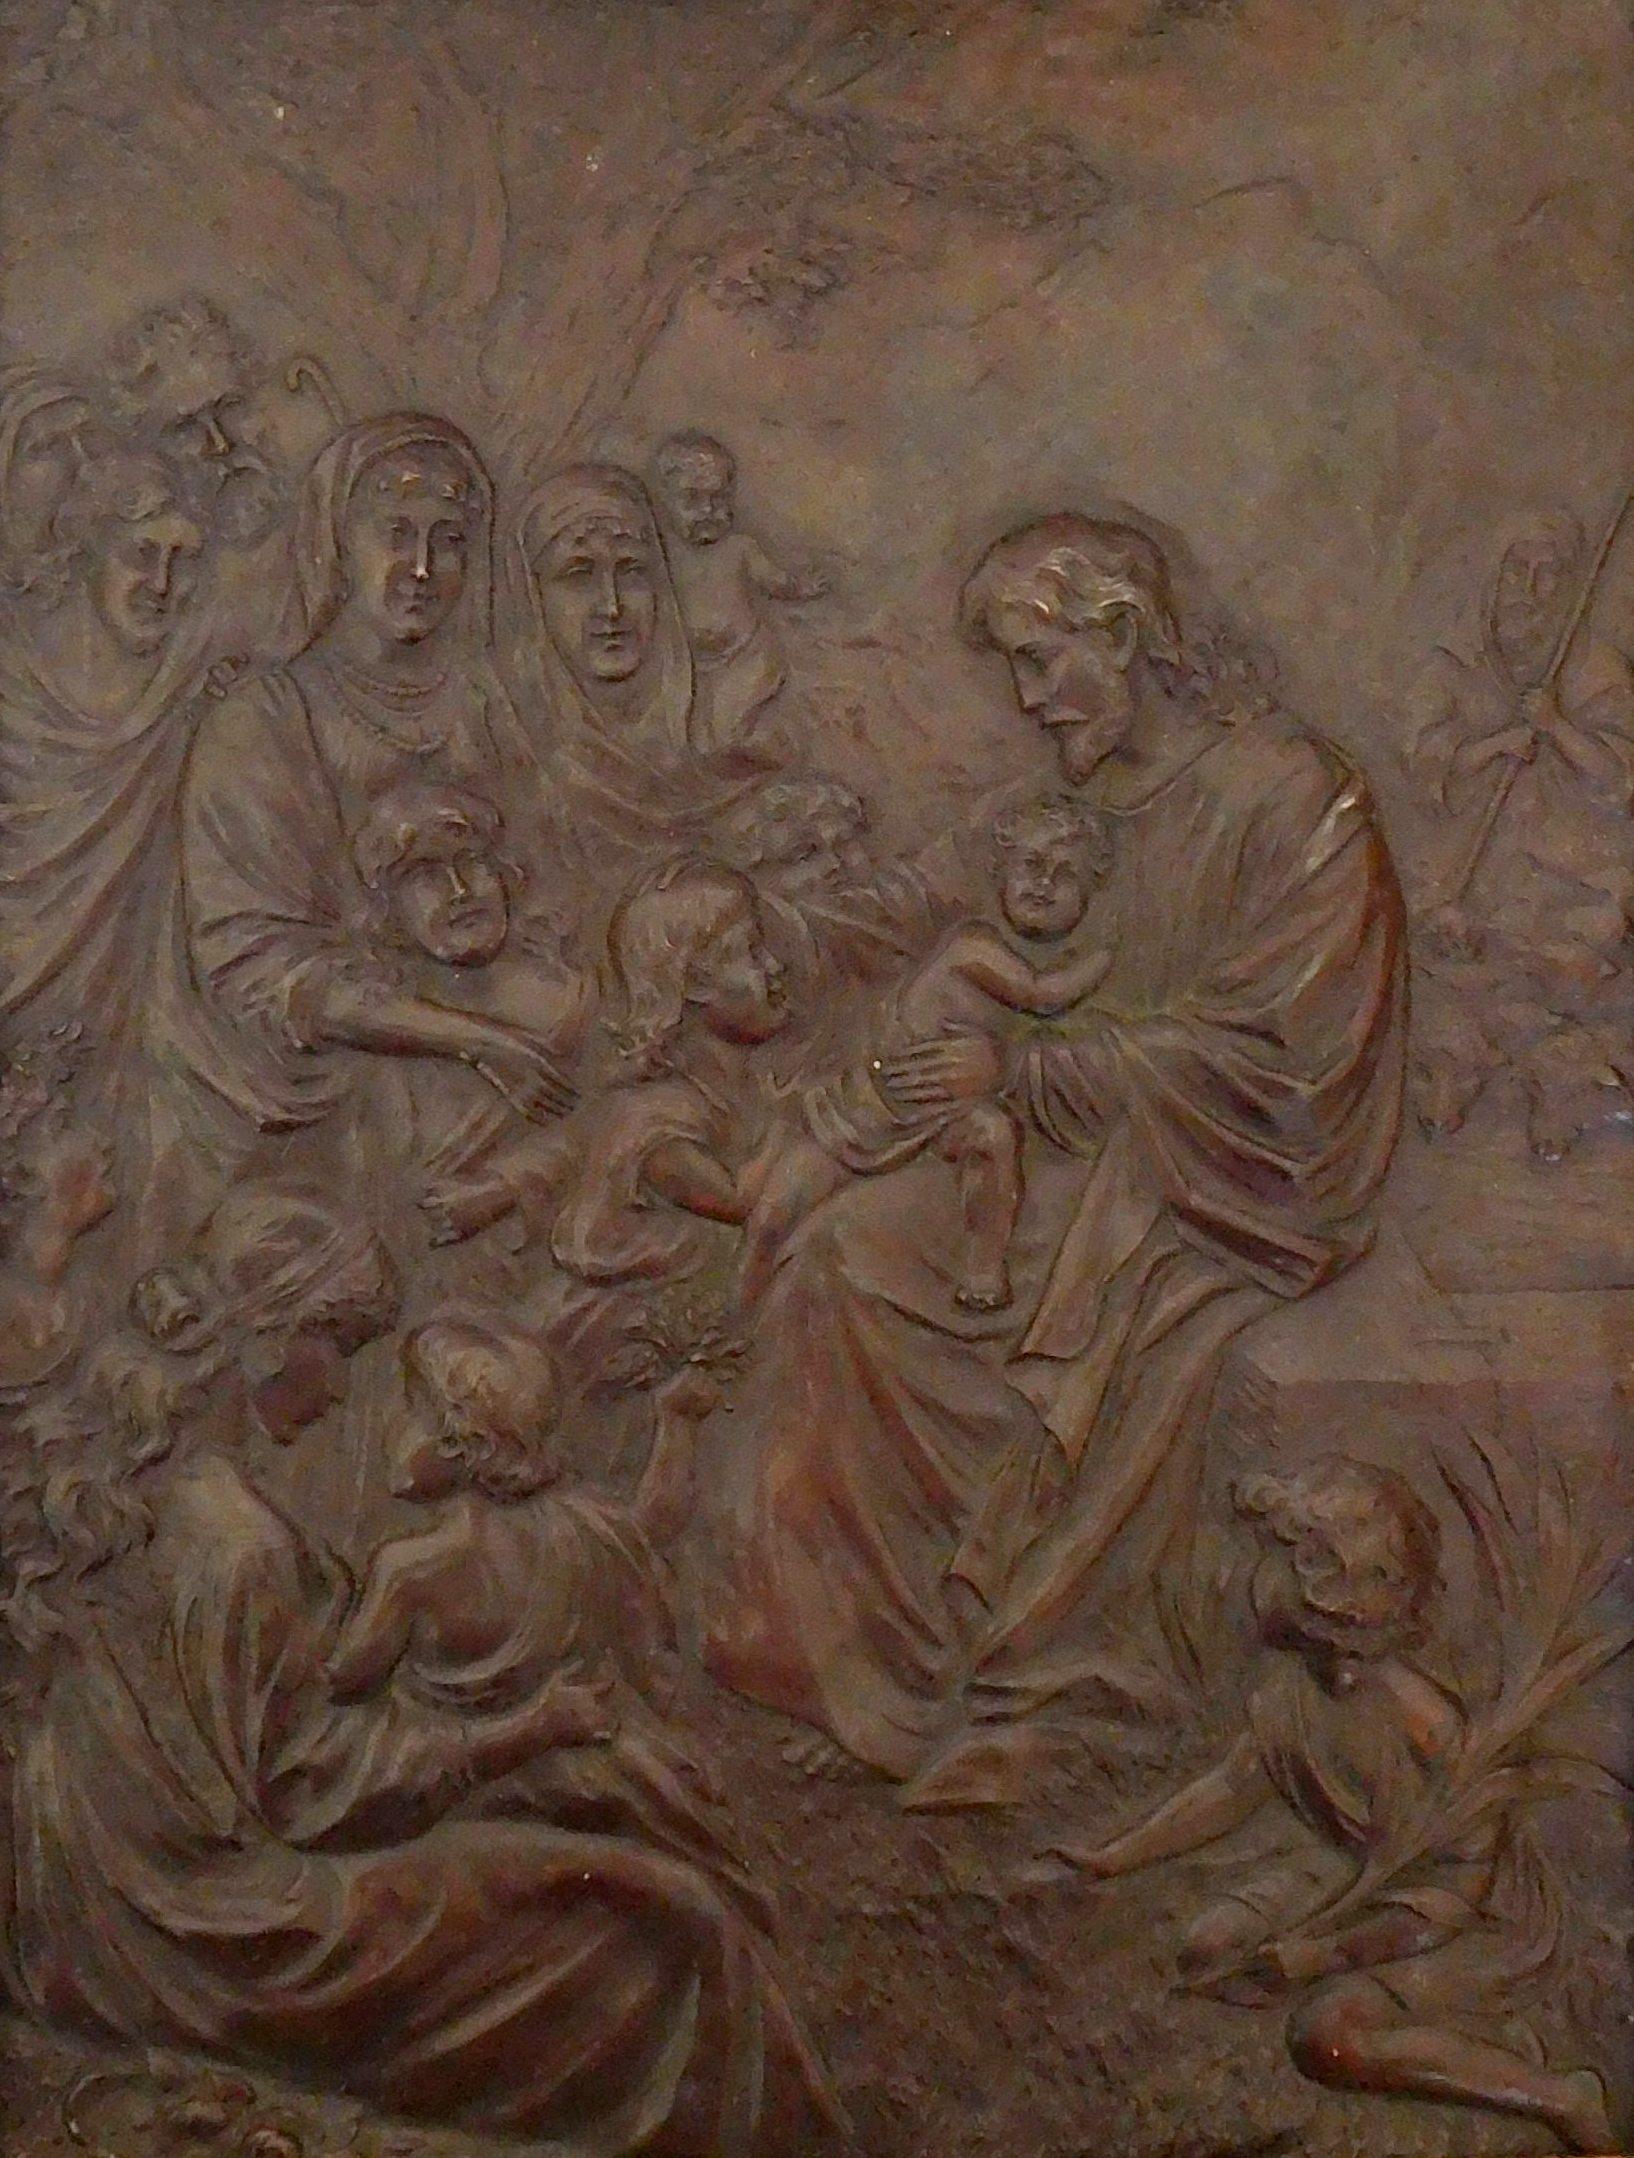 Antique French copper work picturing Jesus Christ talking to children, illustrating famous 